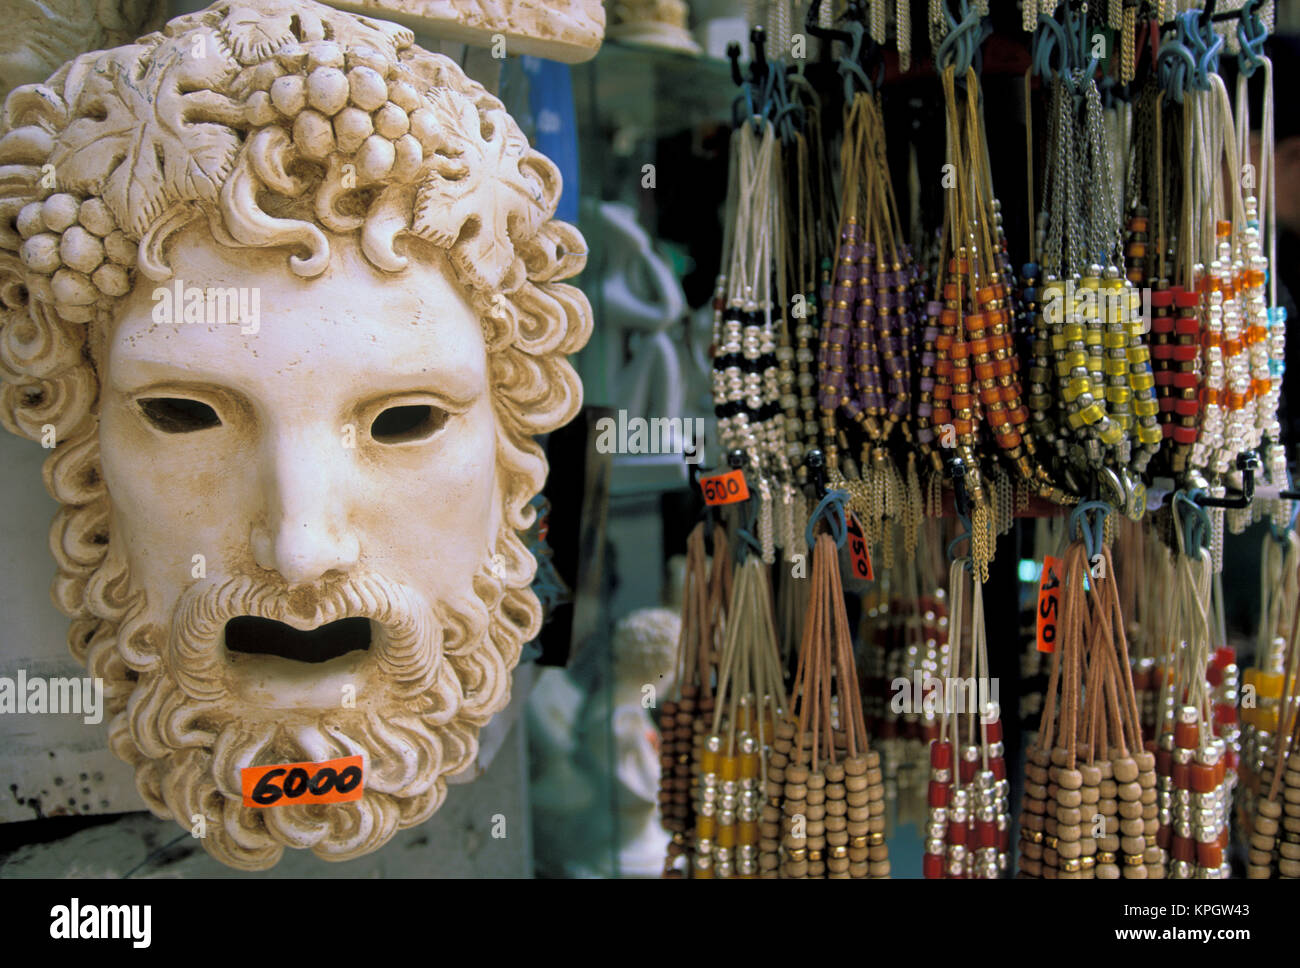 Oia, Santorini, Greece, Mask and strings of beads offered for sale at an outdoor market Stock Photo